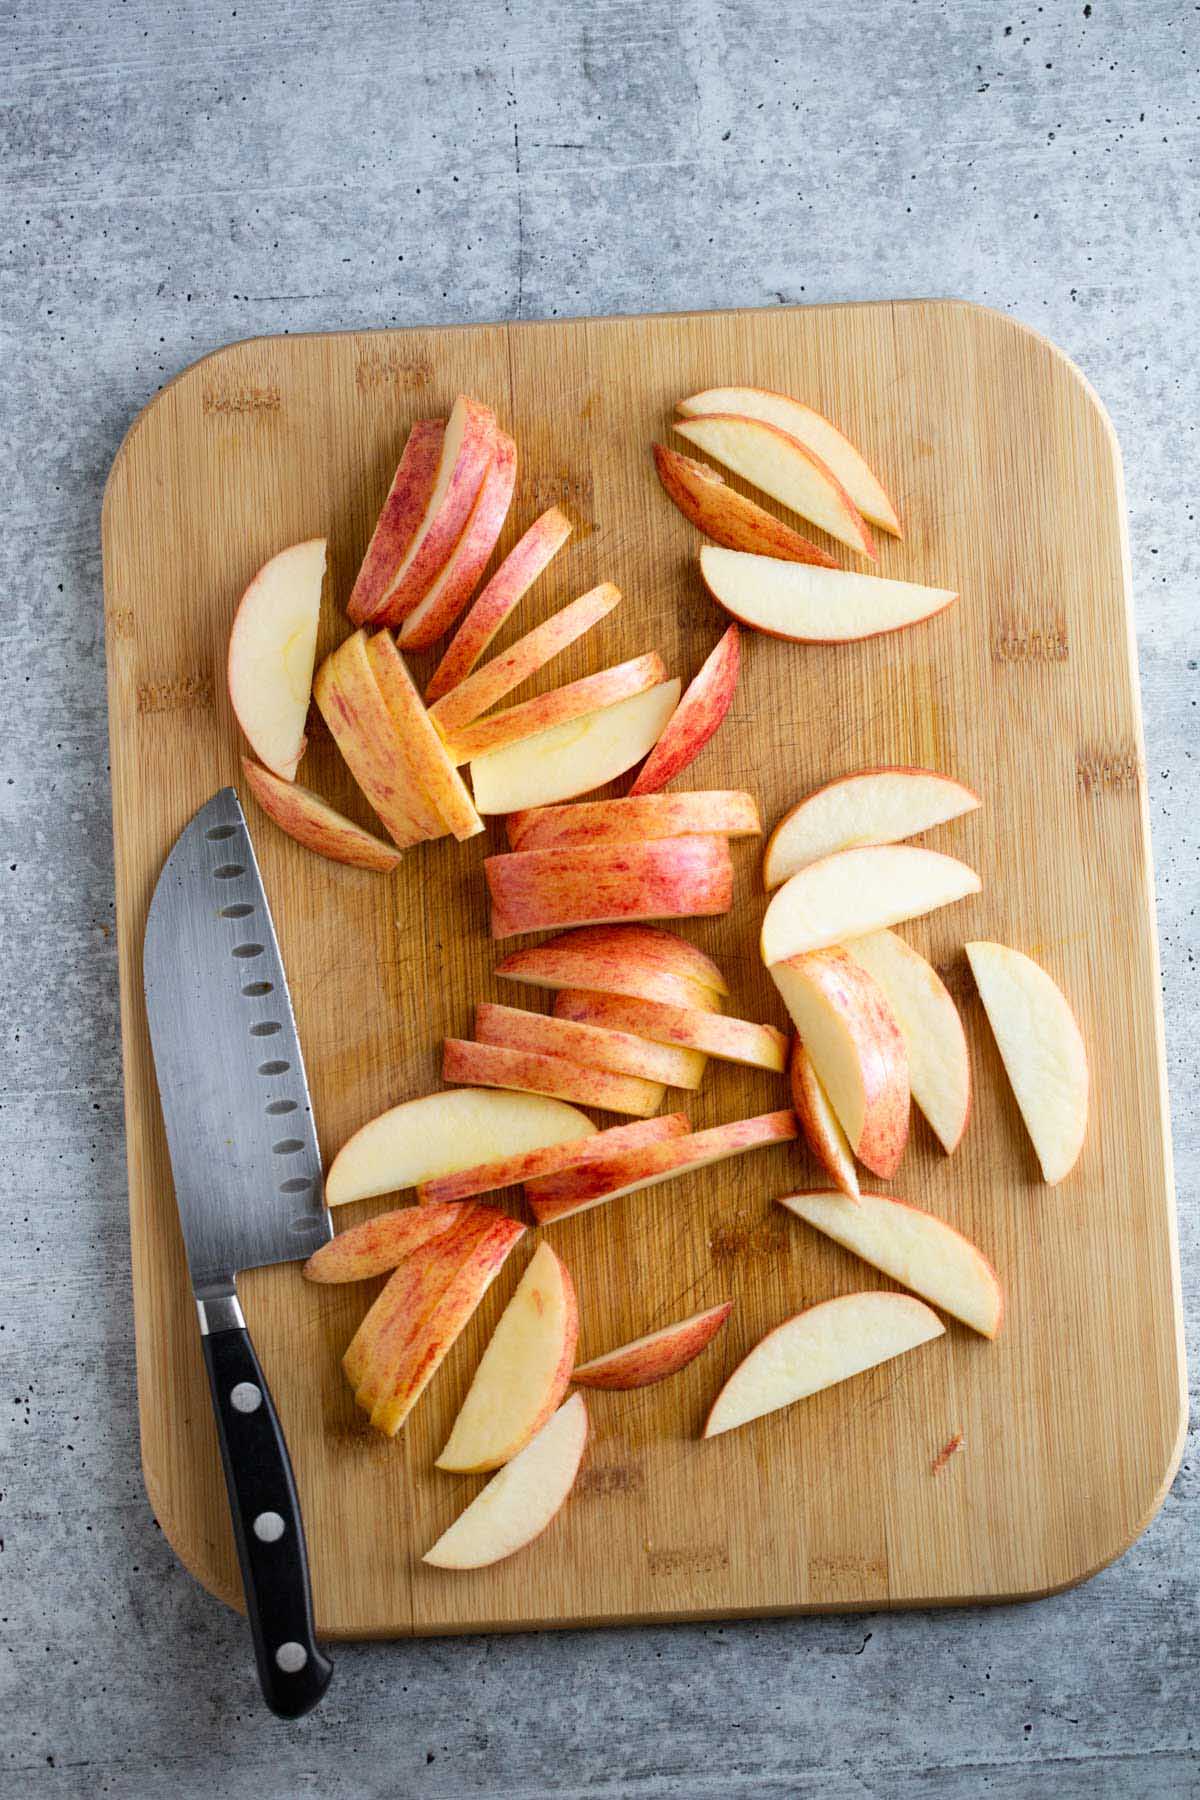 Sliced apples on a cutting board